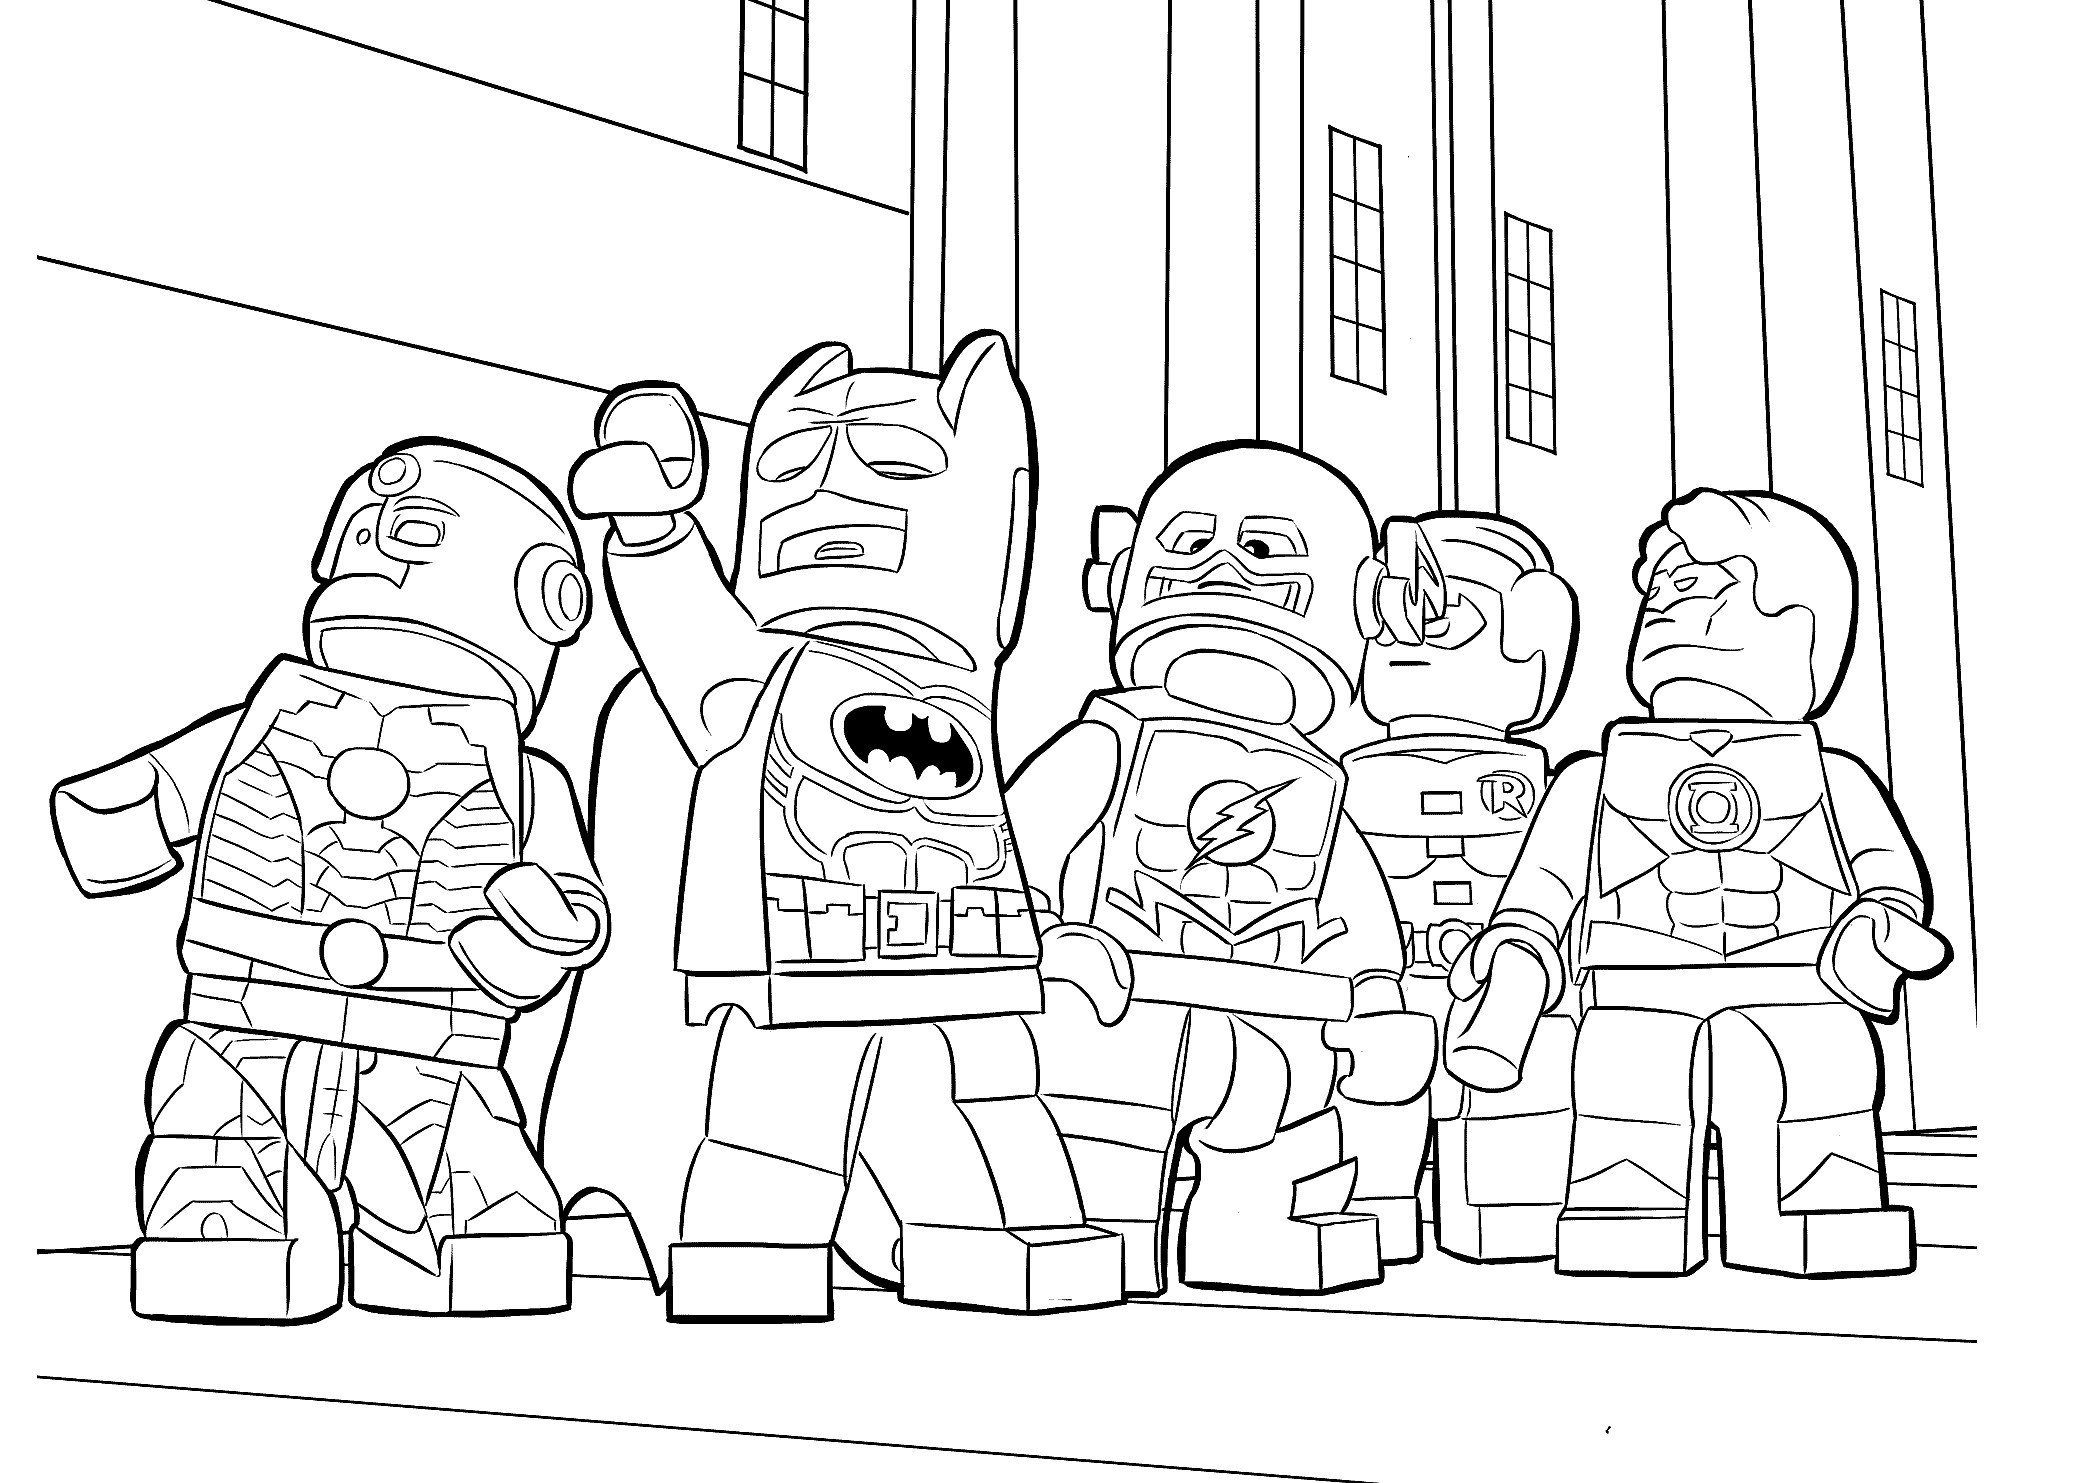 Free Printable Boys Coloring Pages
 Lego heroes coloring page for boys printable free Lego